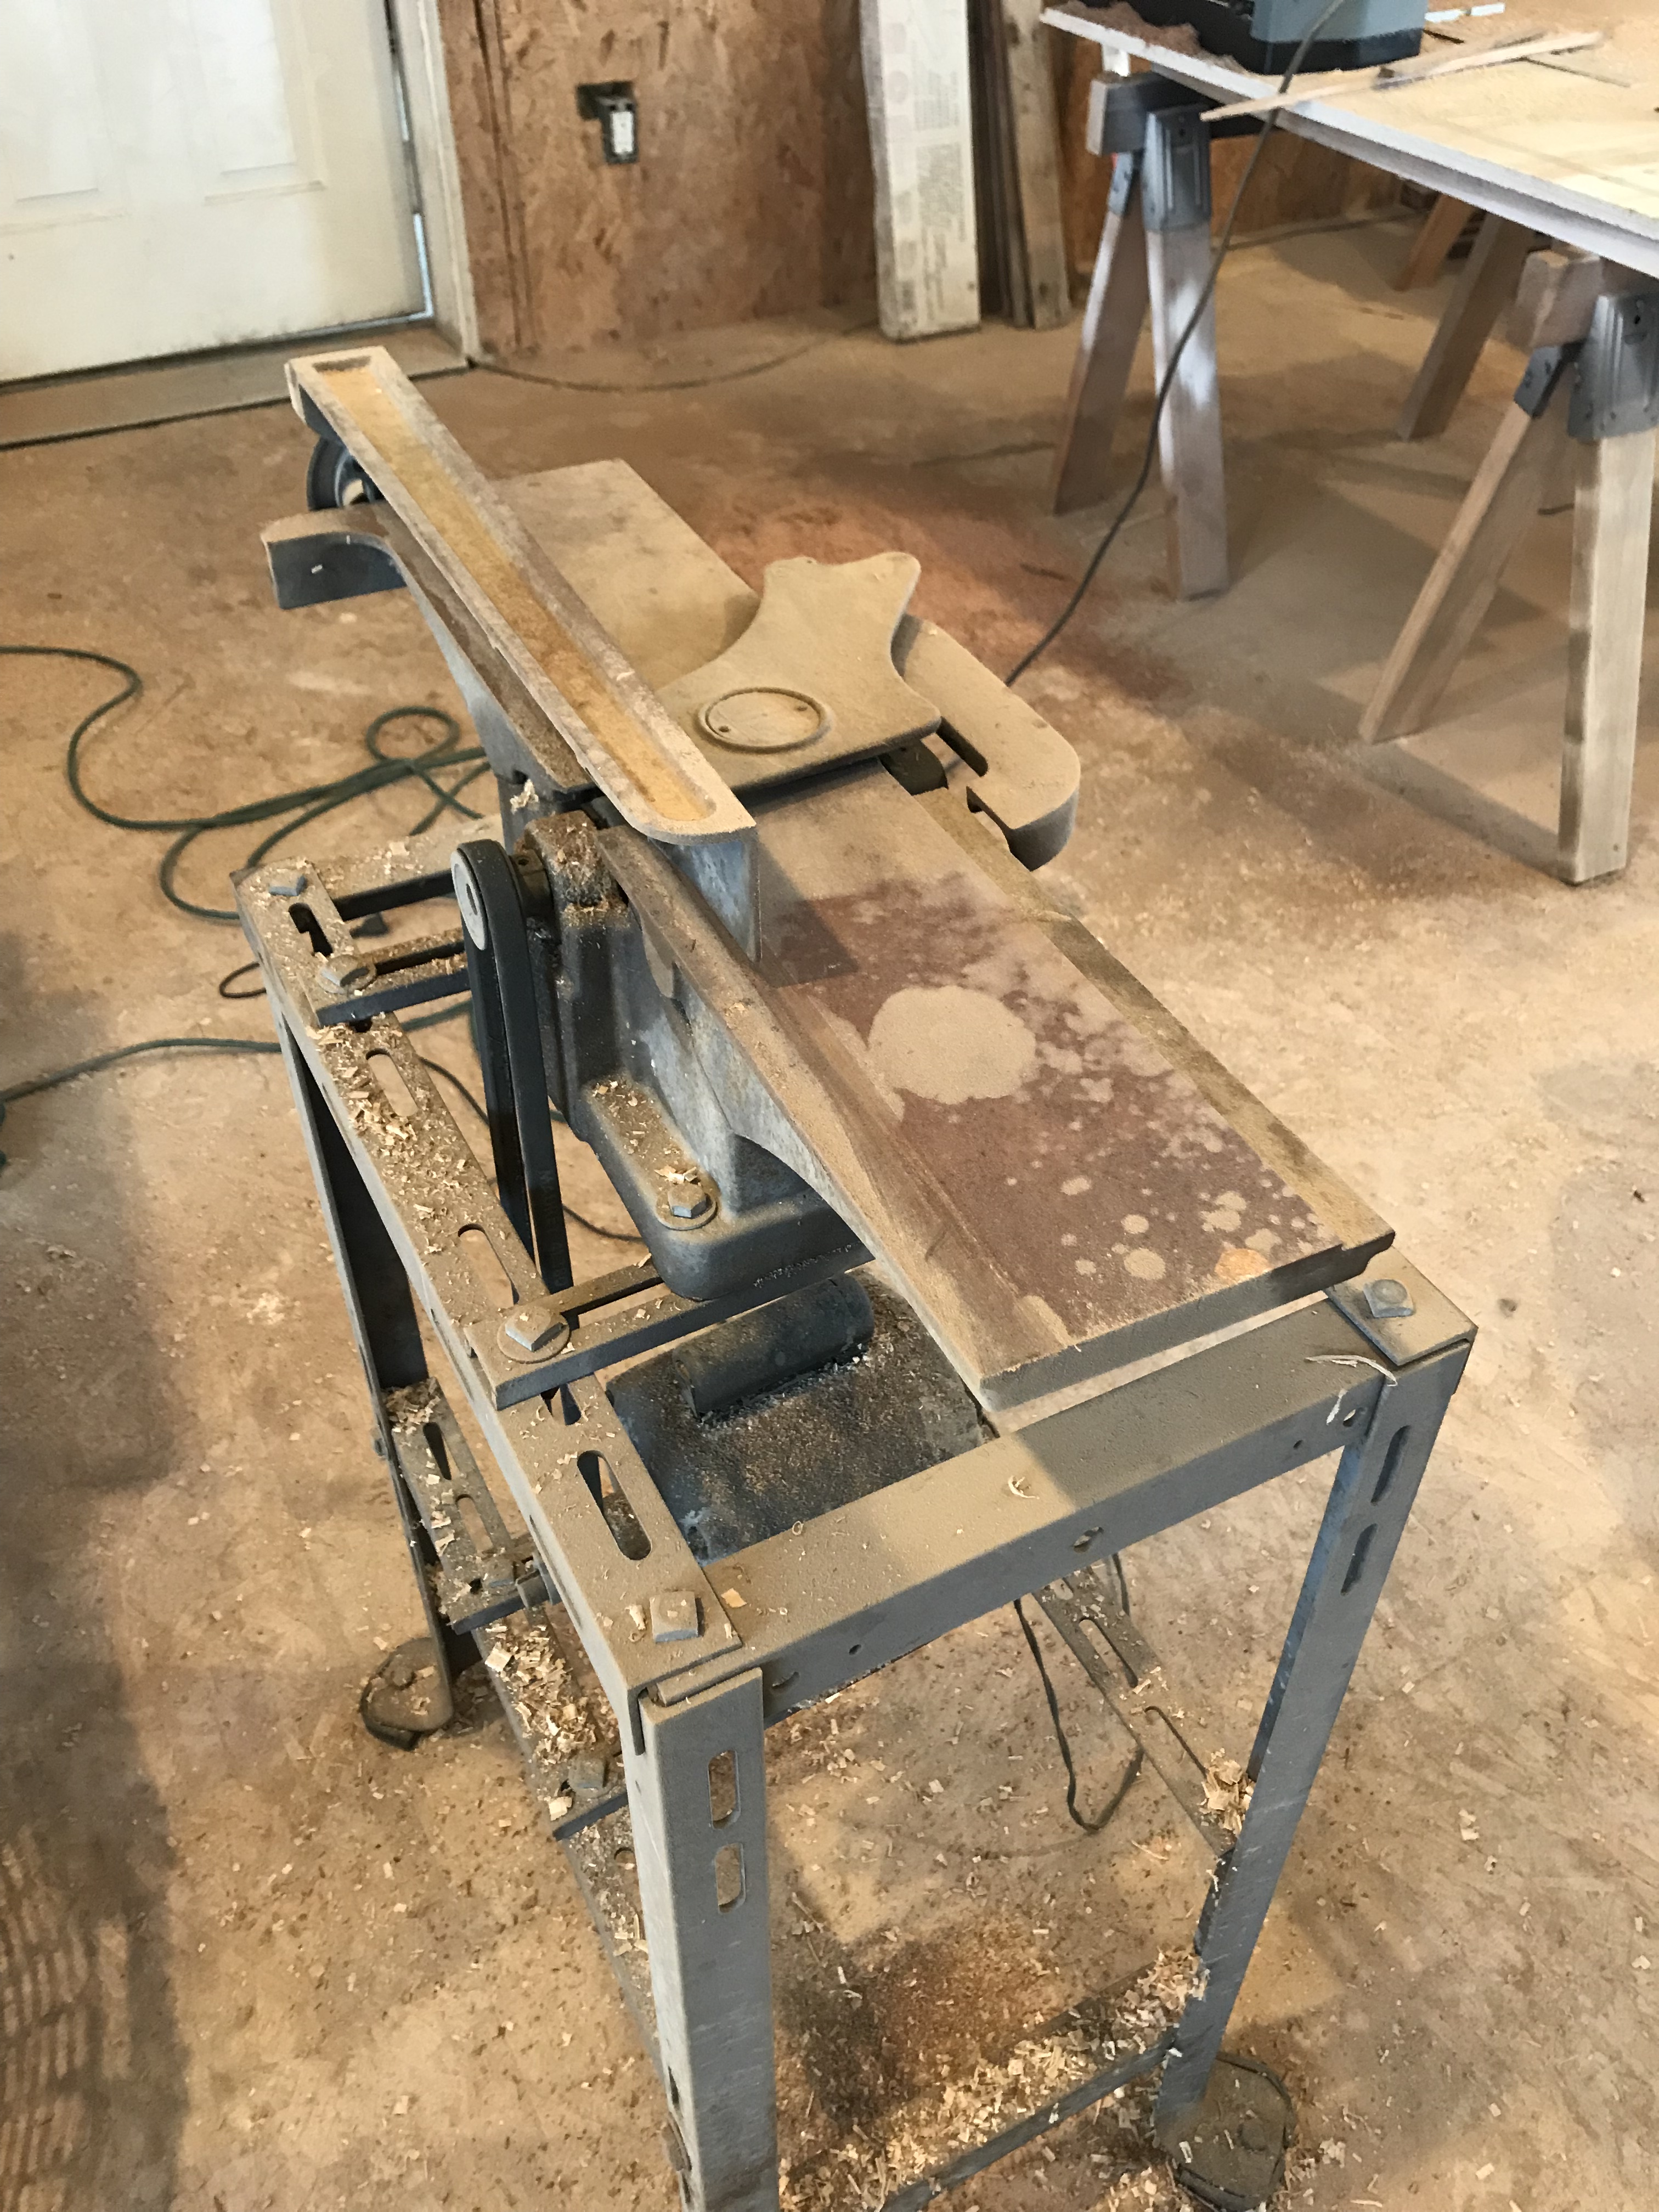 Old jointer used in woodworking sitting in a work shop with saw dust and wood chips dusted on it